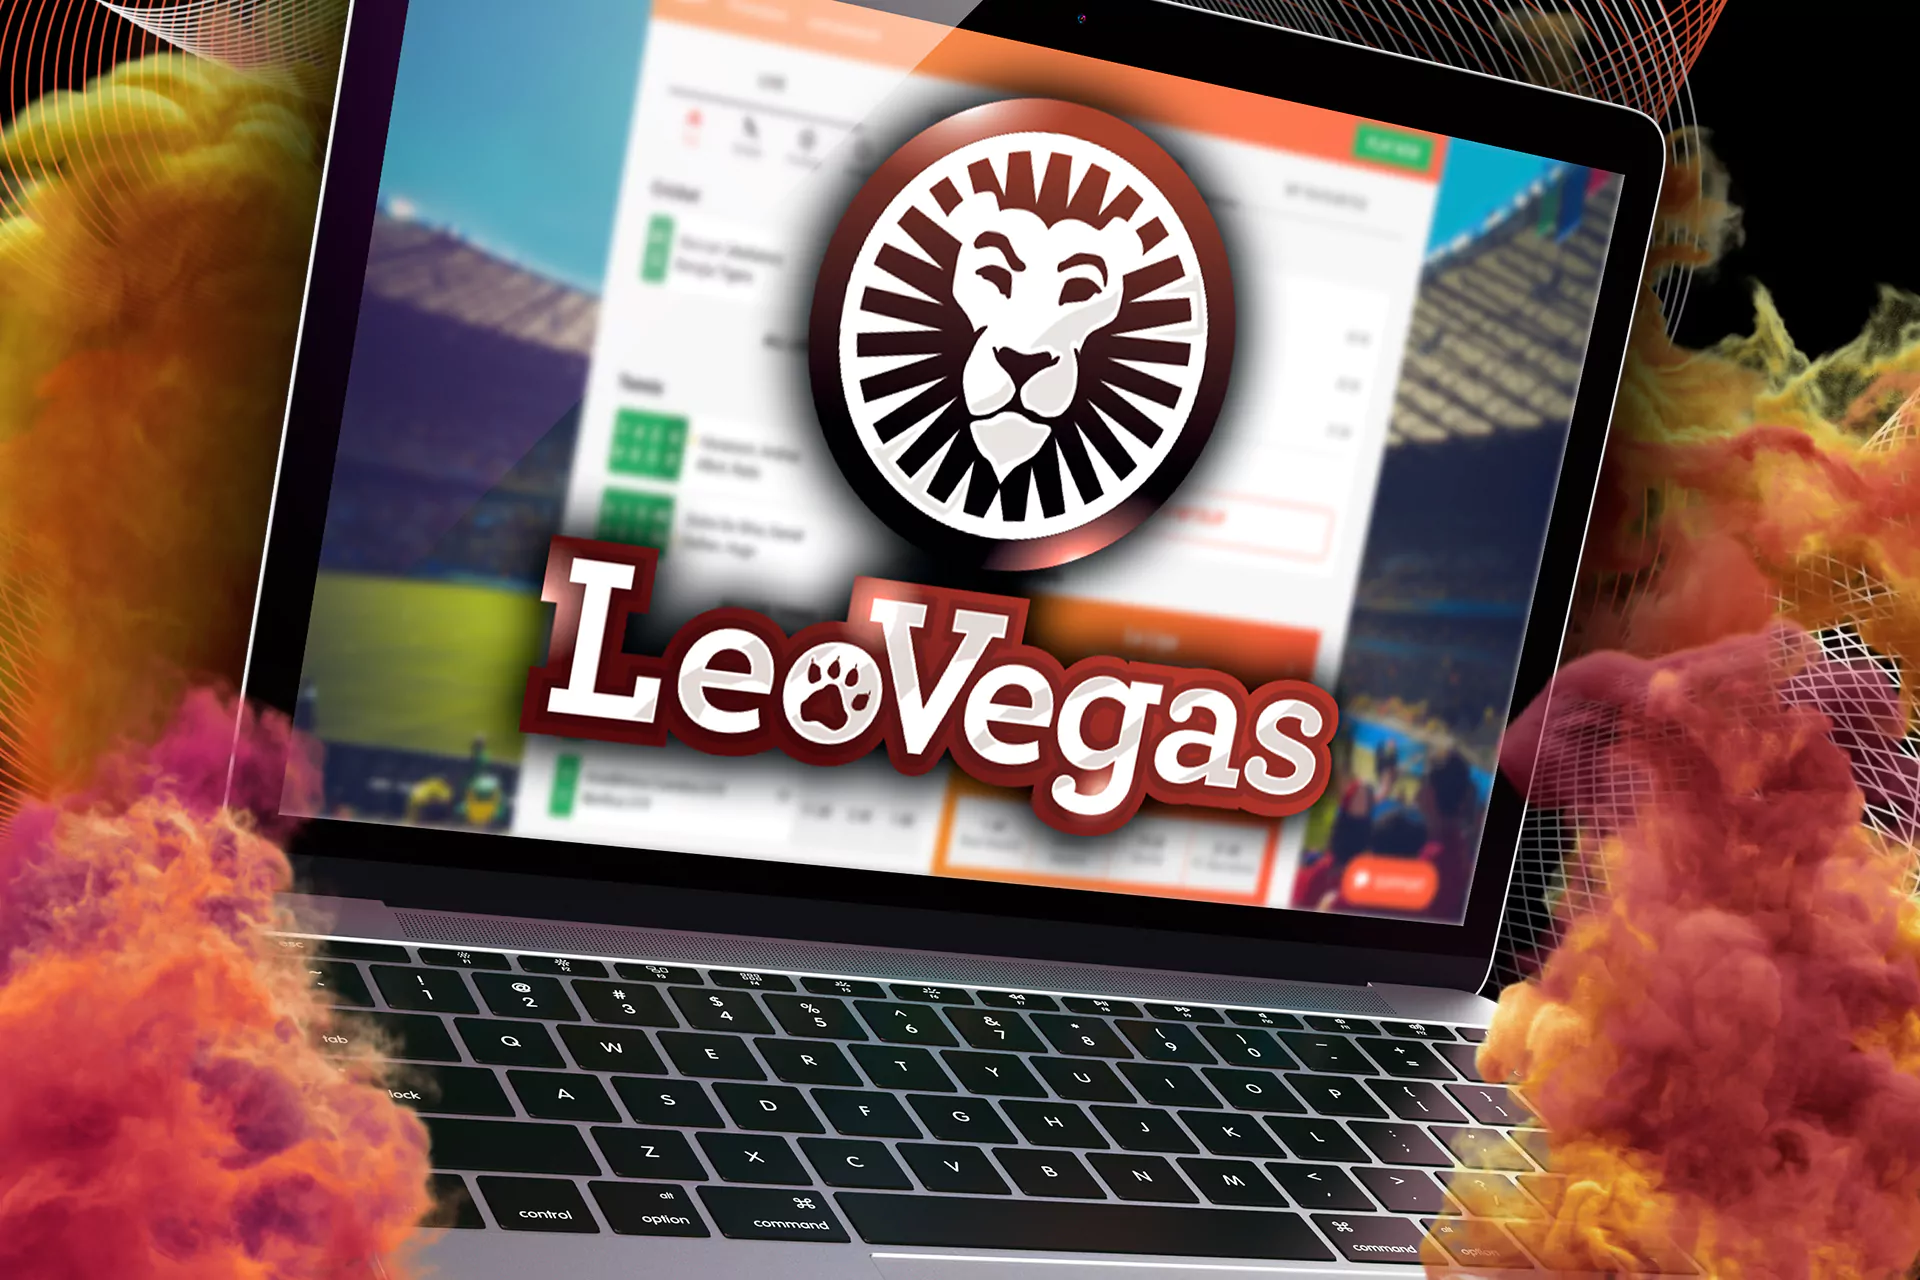 LeoVegas is Indian-friendly sportsbook and online casino.